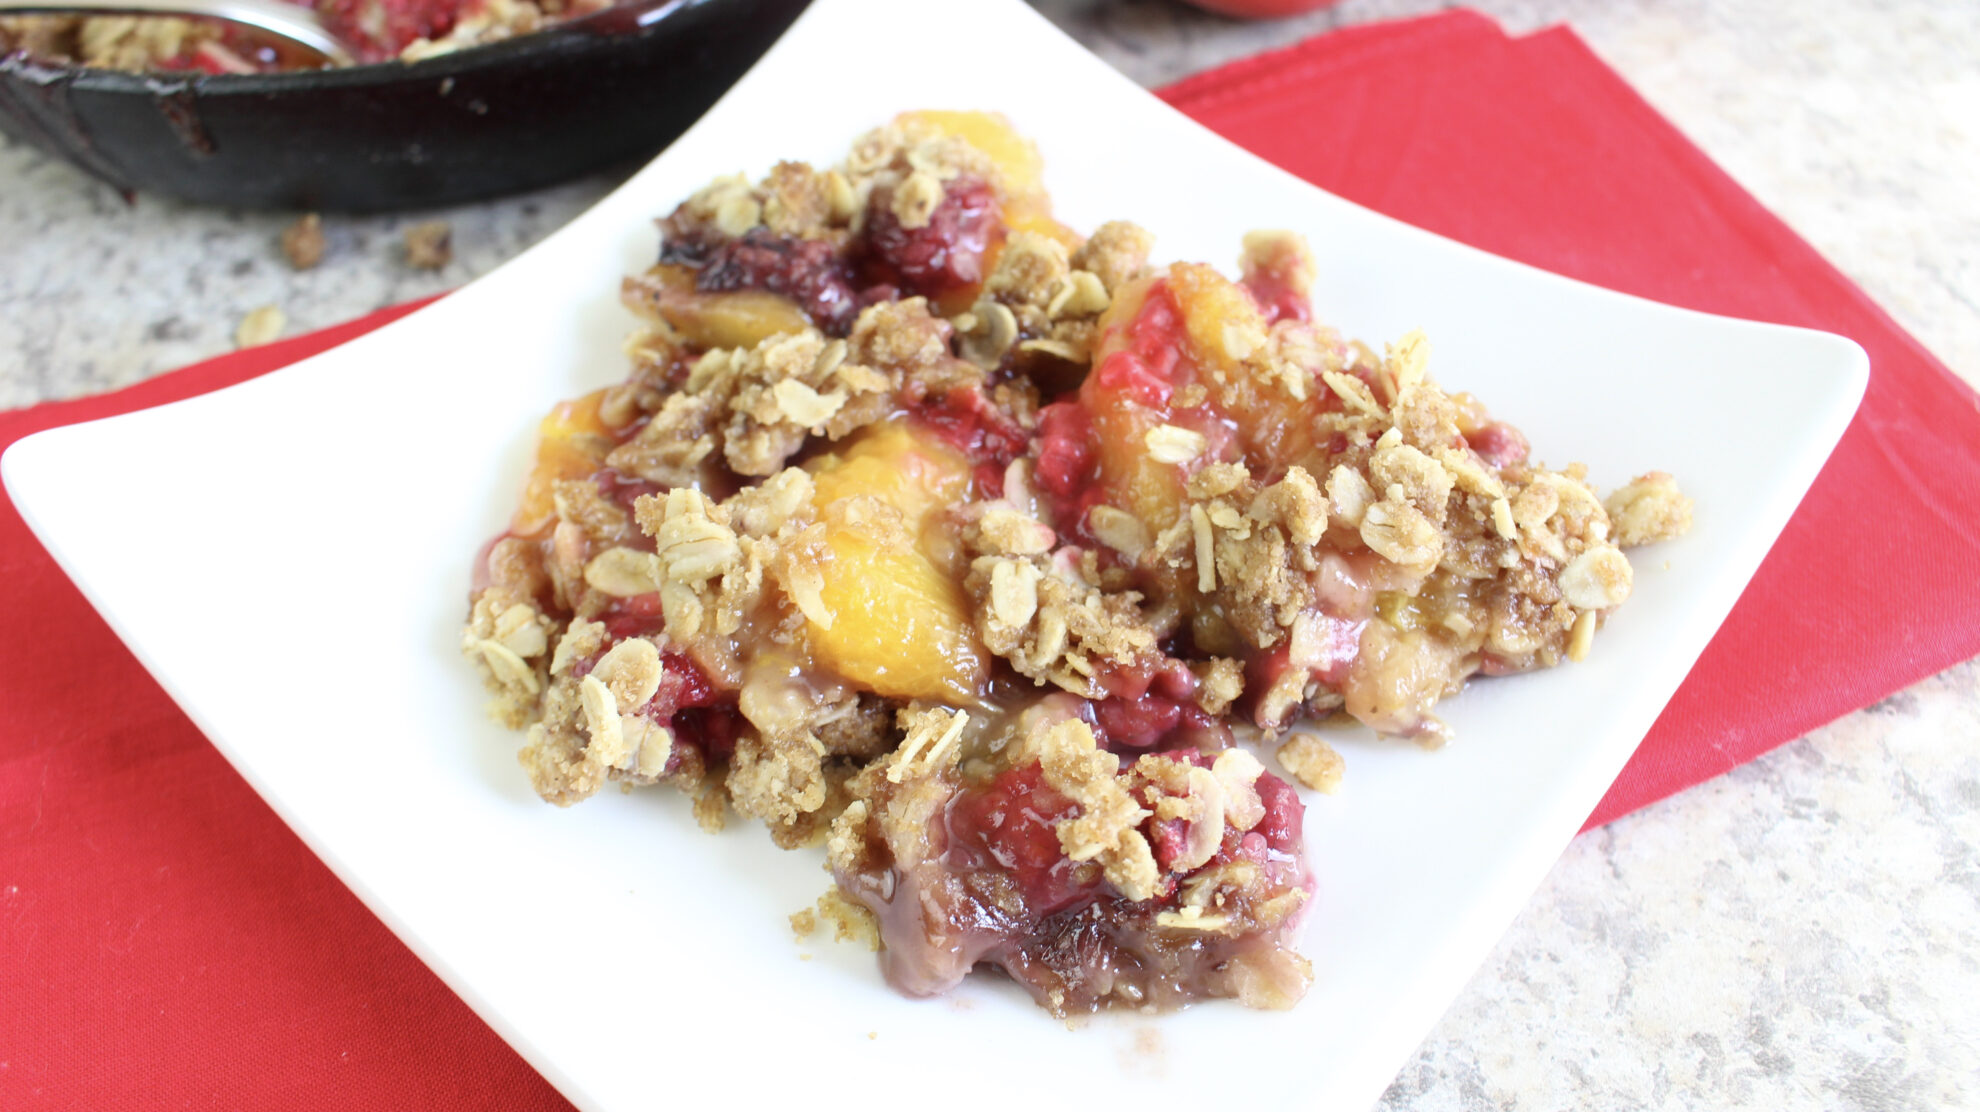 With fall around the corner this Skillet Peach Raspberry Crisp is calling my name and it's the perfect dessert!!! Find it on 5 Dollar Dinners!